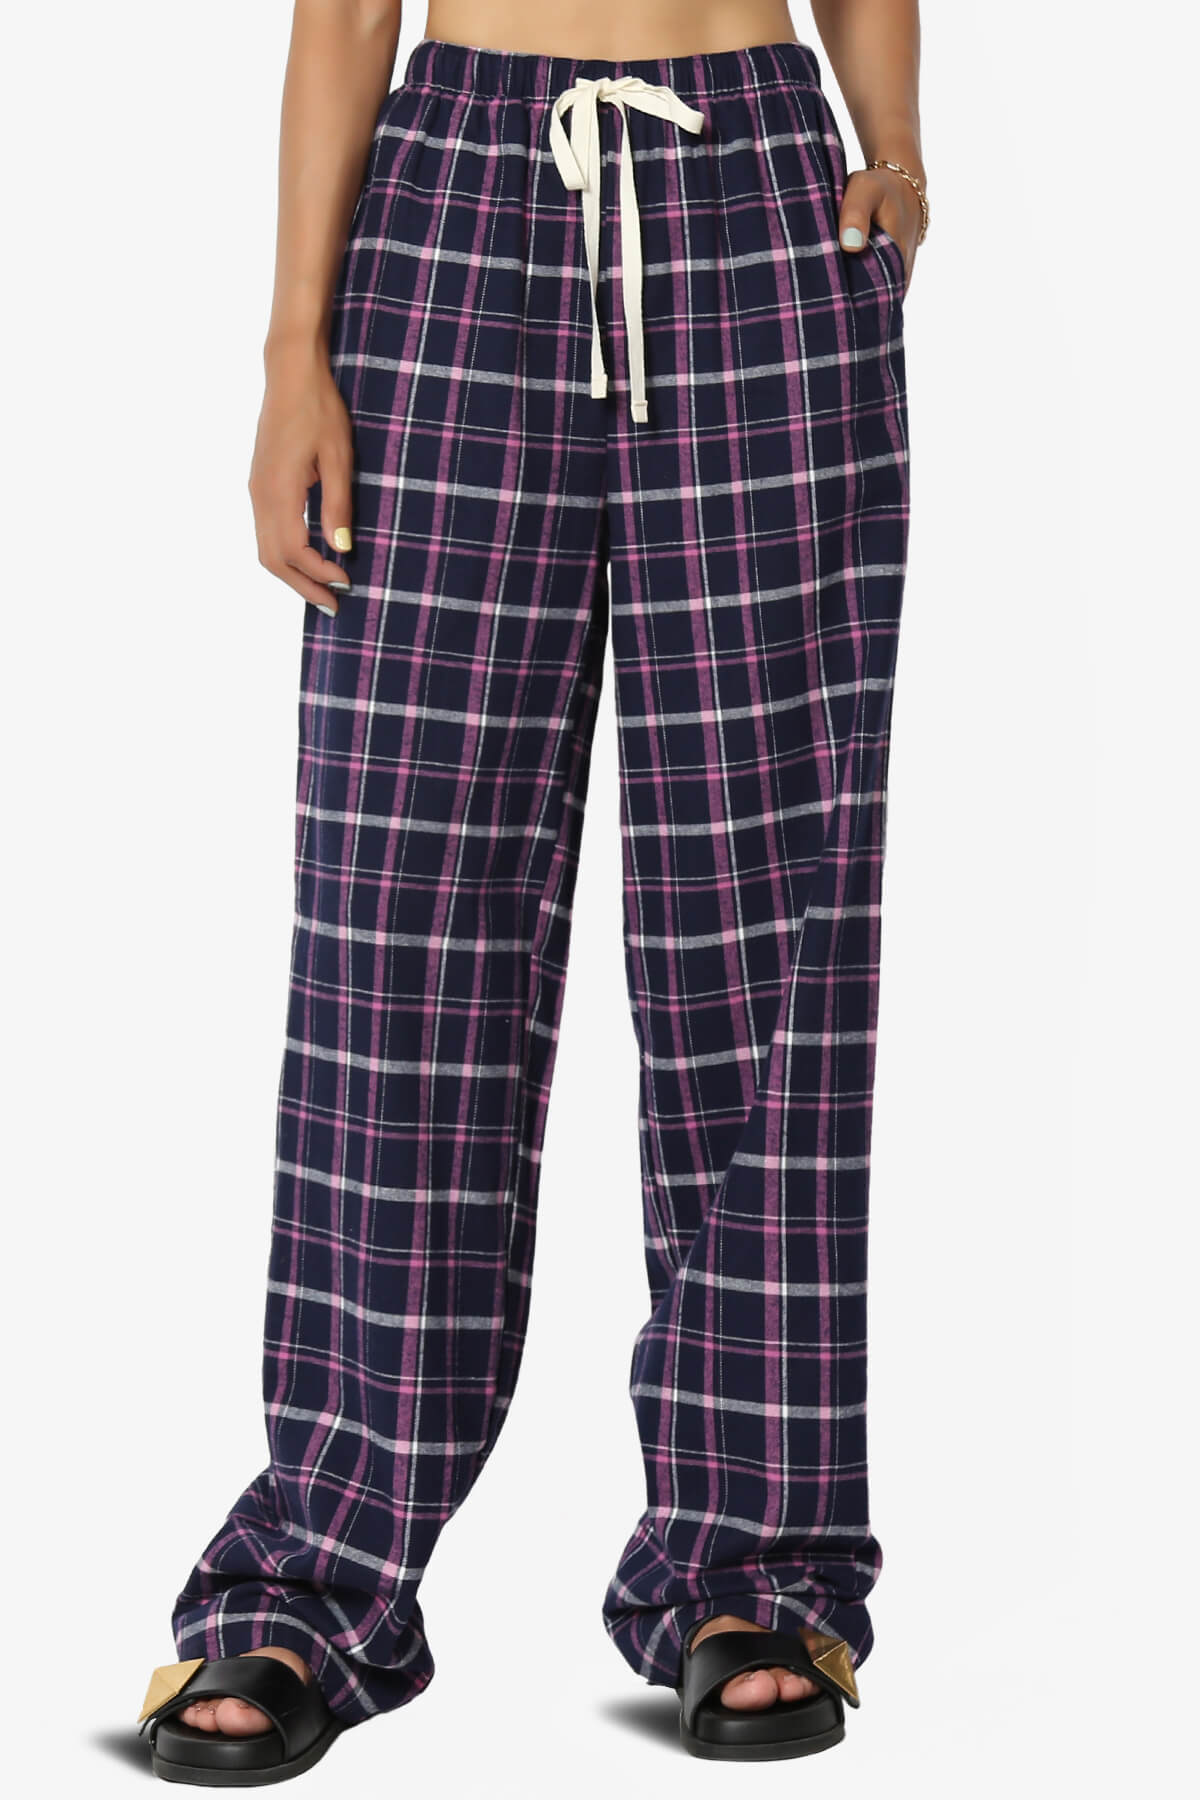 Air Curvey Women's Plaid Pants Loose Casual Soft Lounge Pants Wide Leg Pajama  Trousers With Pockets Black Plaid S at  Women's Clothing store